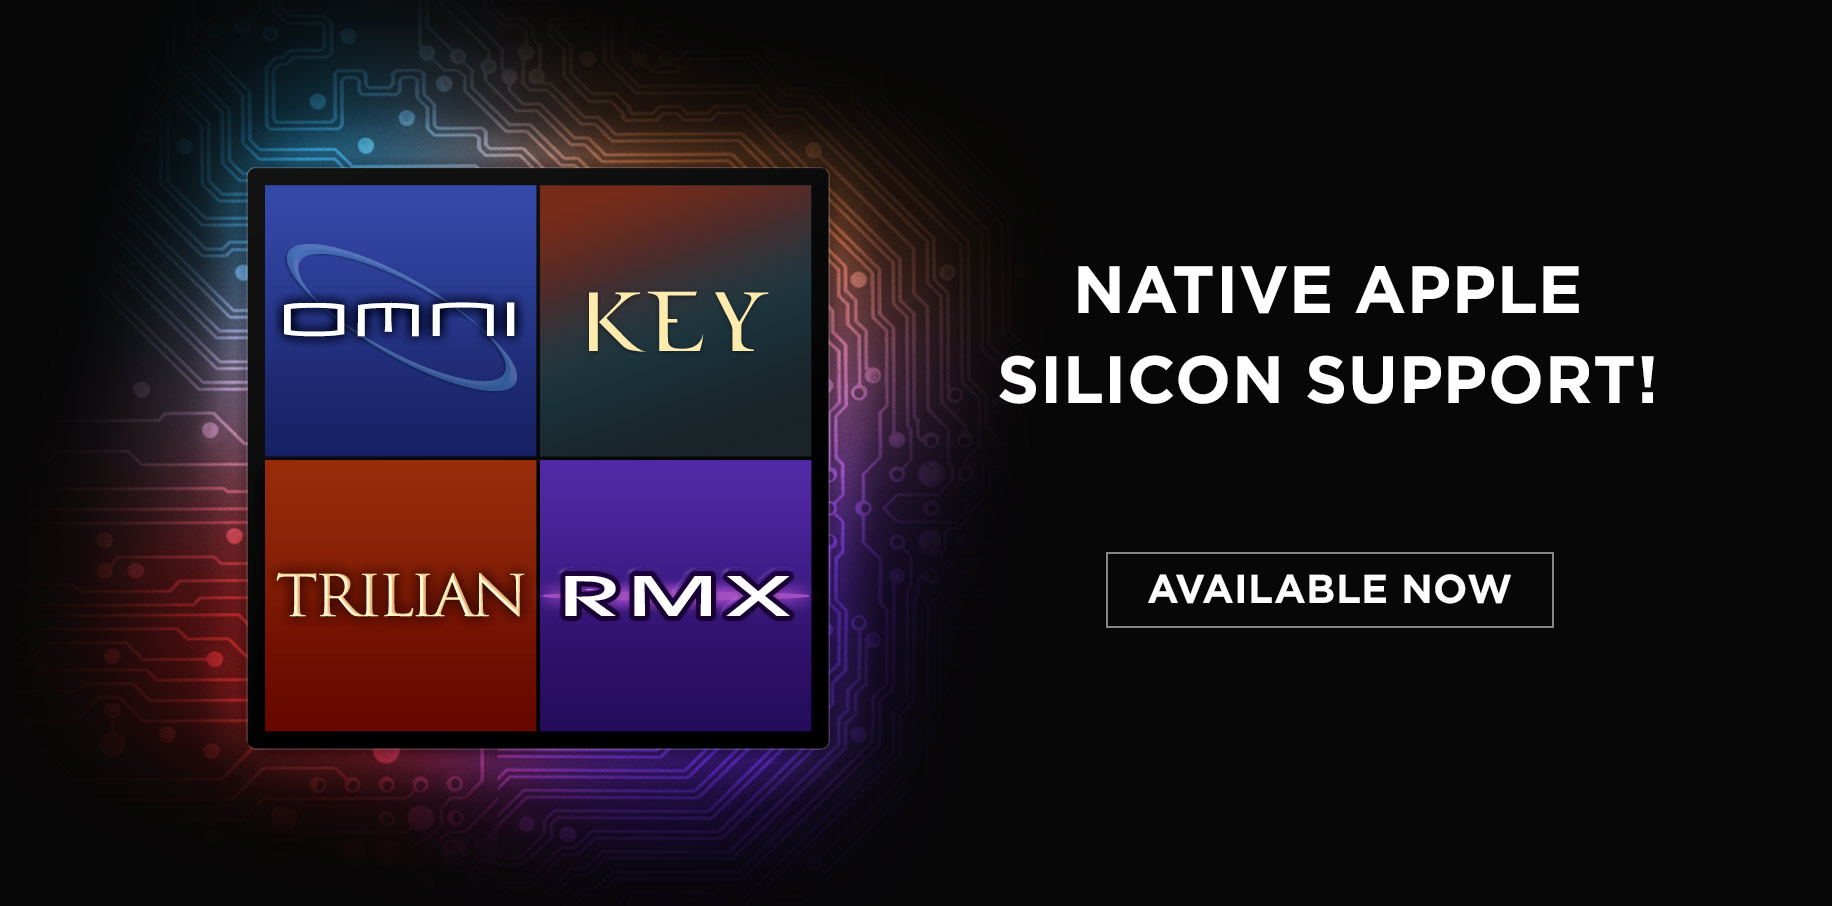 Native Apple Silicon and VST3 Support!